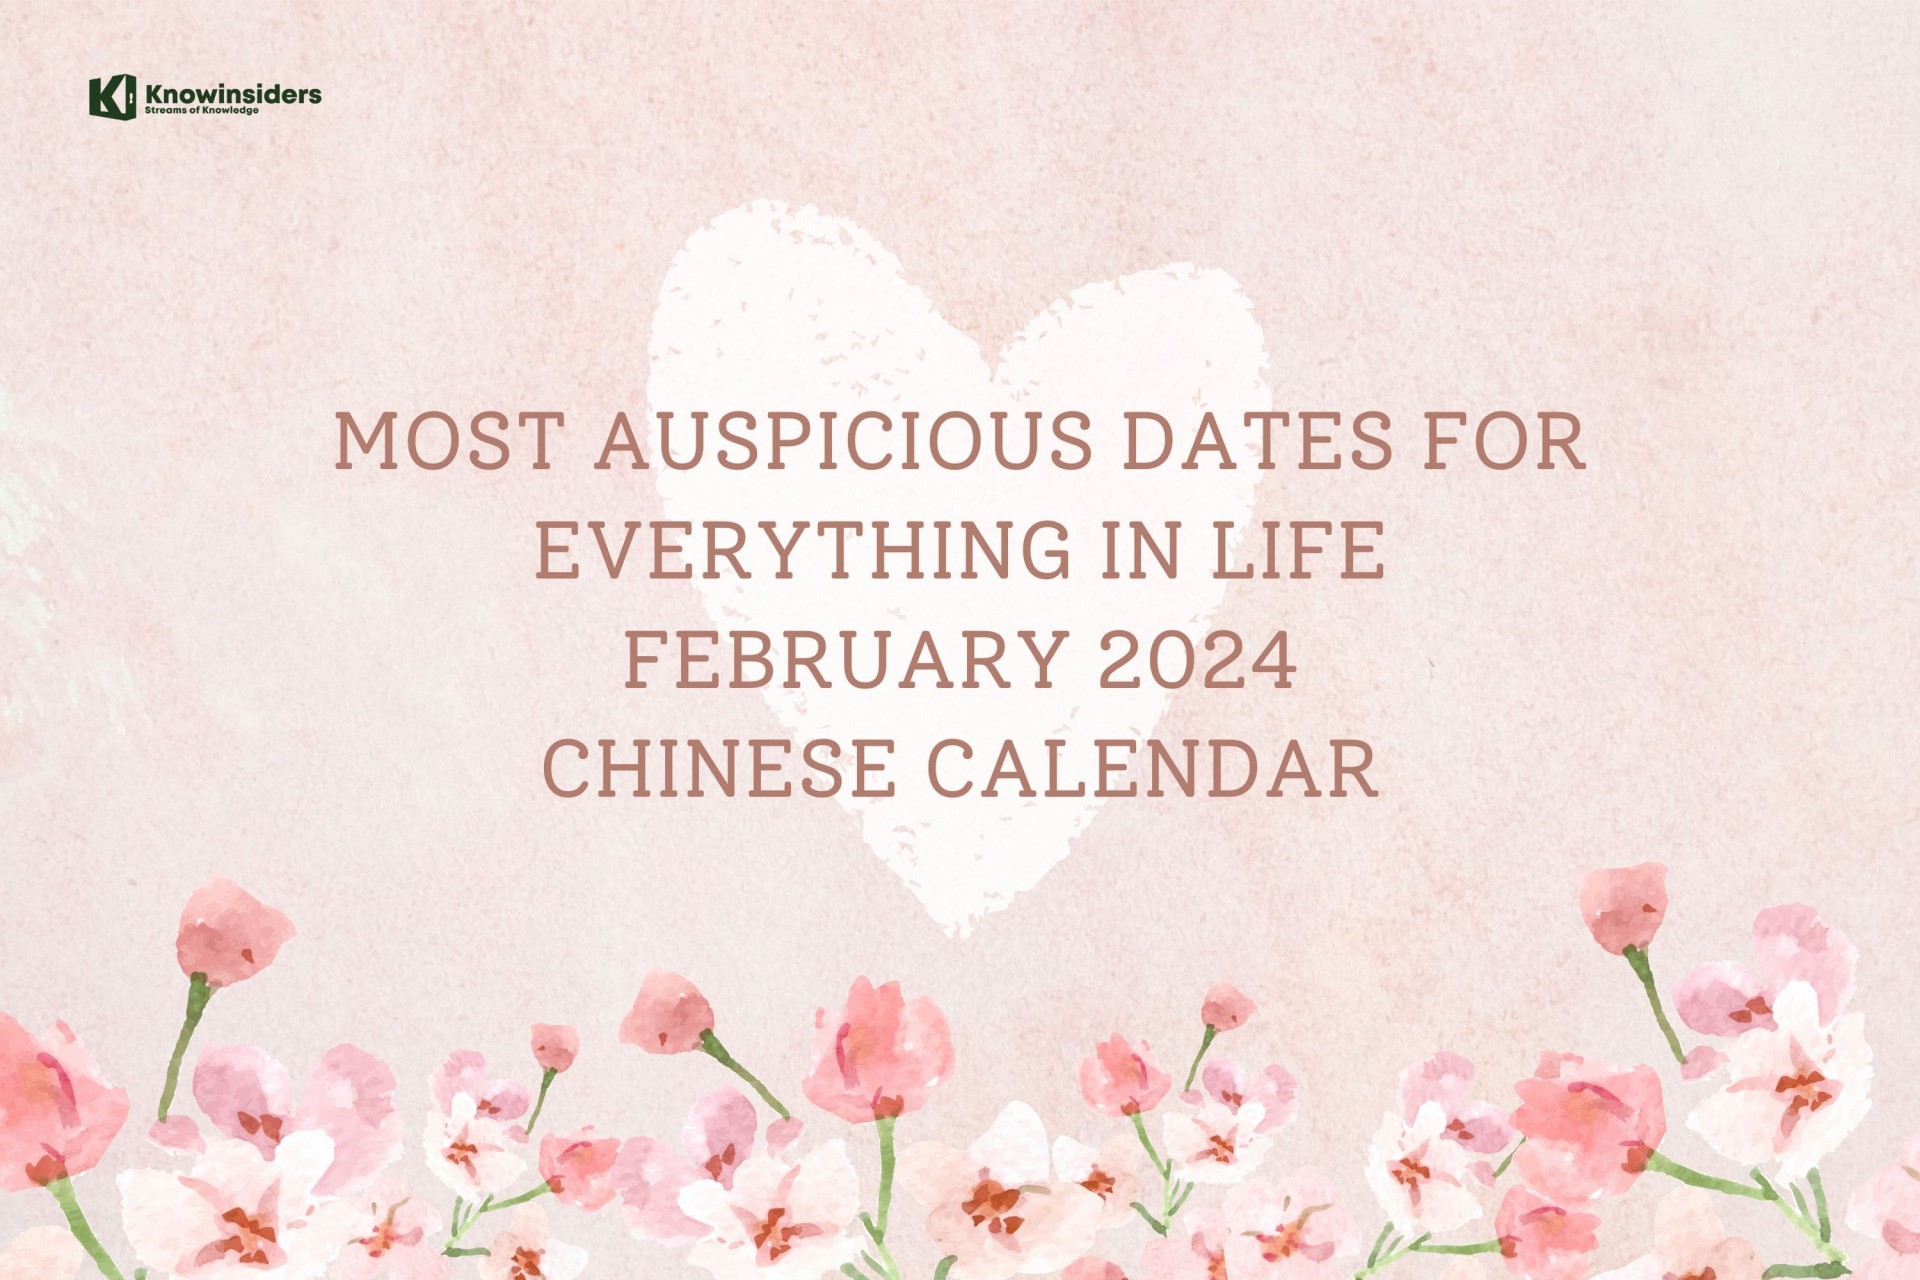 Most Auspicious Dates For Grand Opening In 2024, According to Chinese